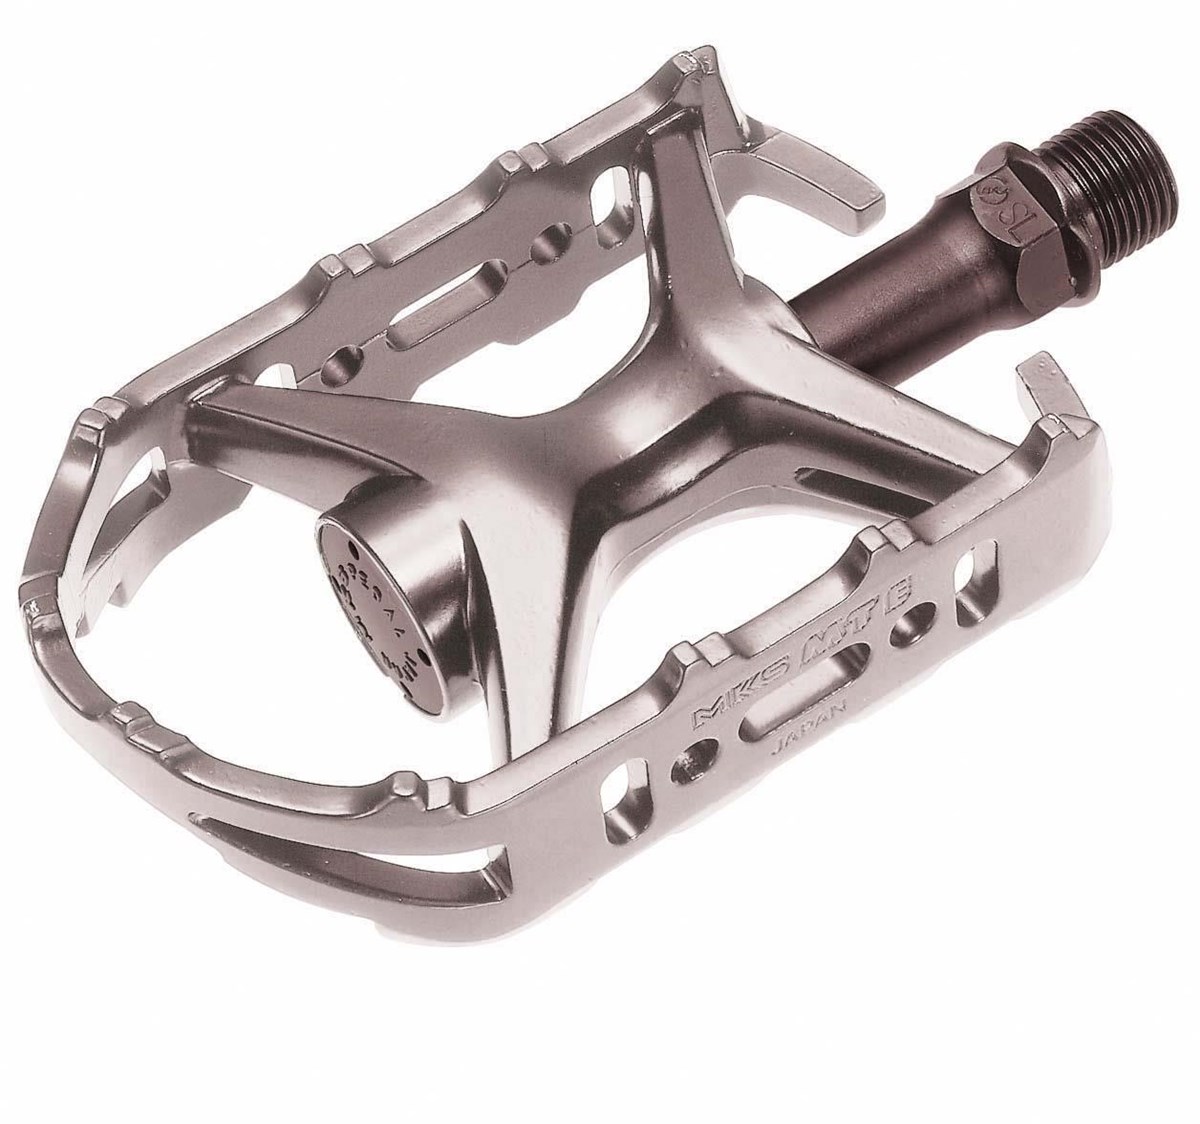 MKS MT E Cage Pedals product image